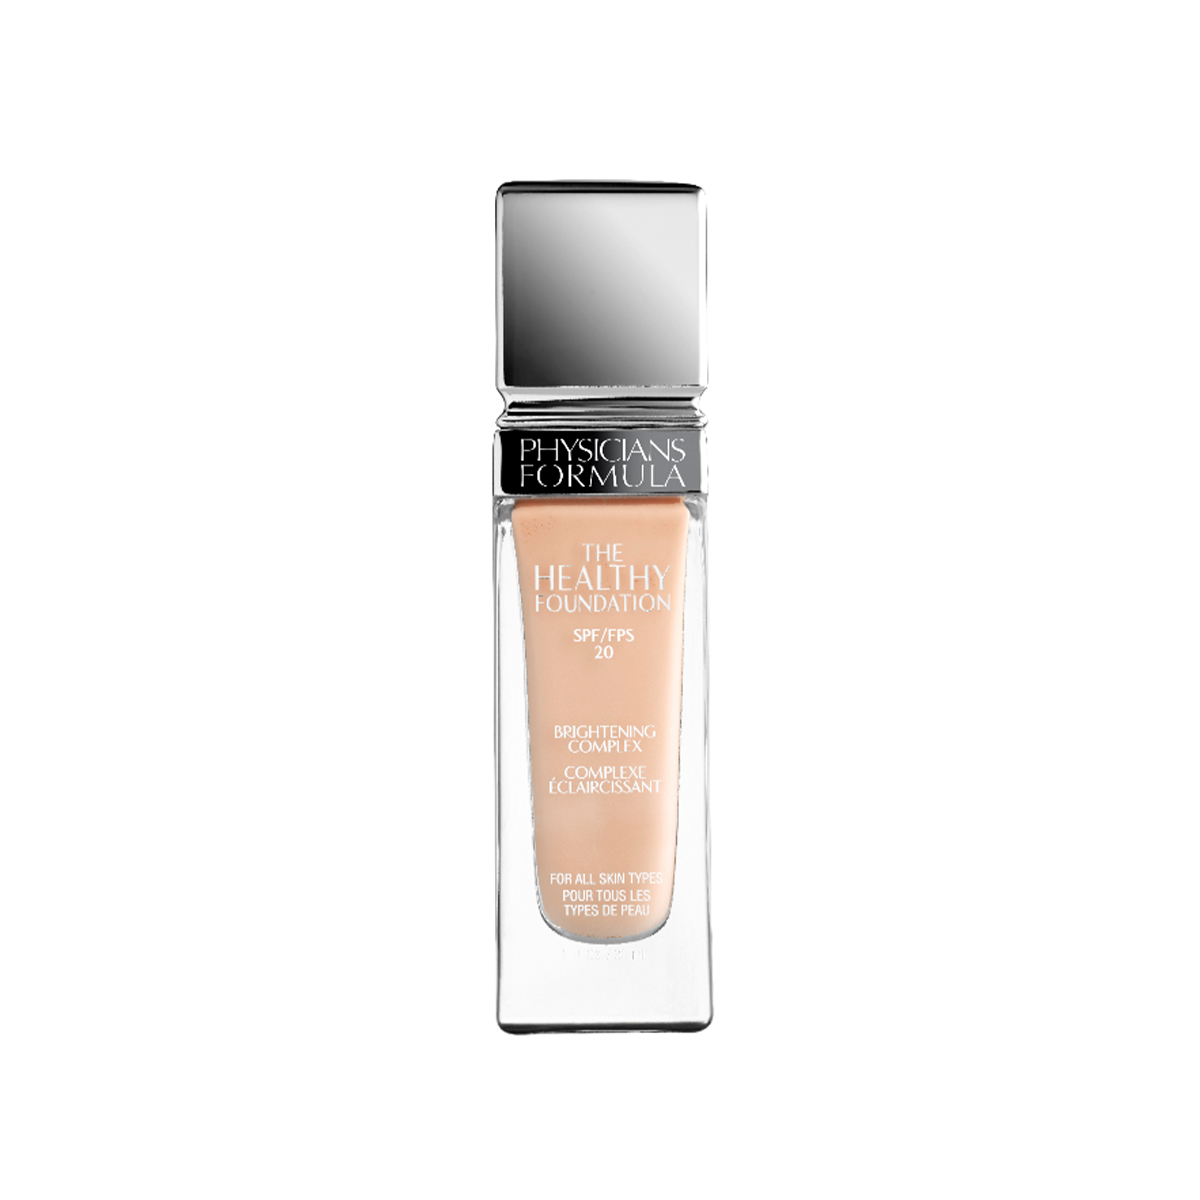 Physician's Formula The Healthy Foundation SPF 20